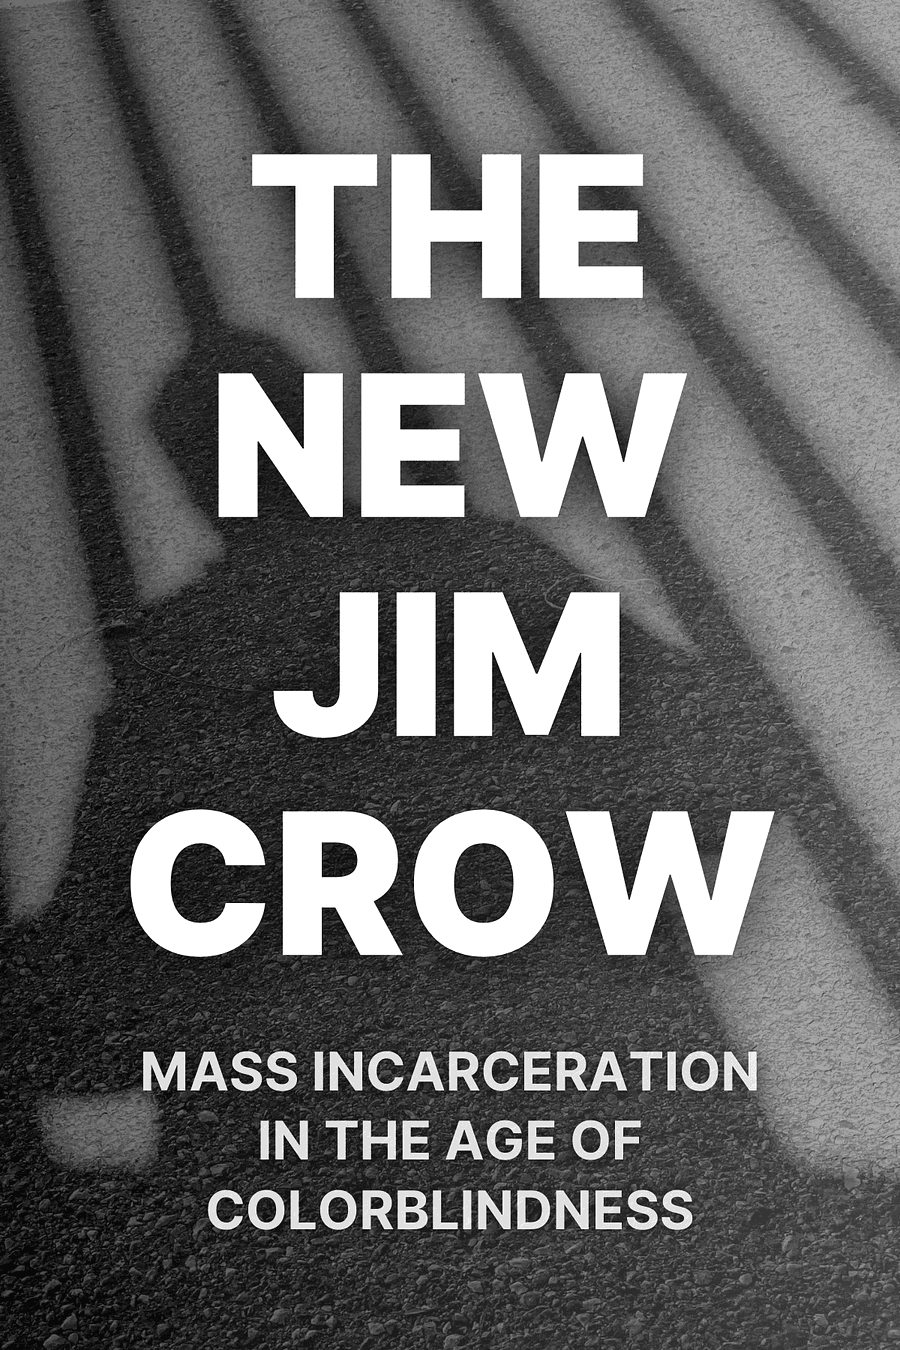 The New Jim Crow by Michelle Alexander - Book Summary